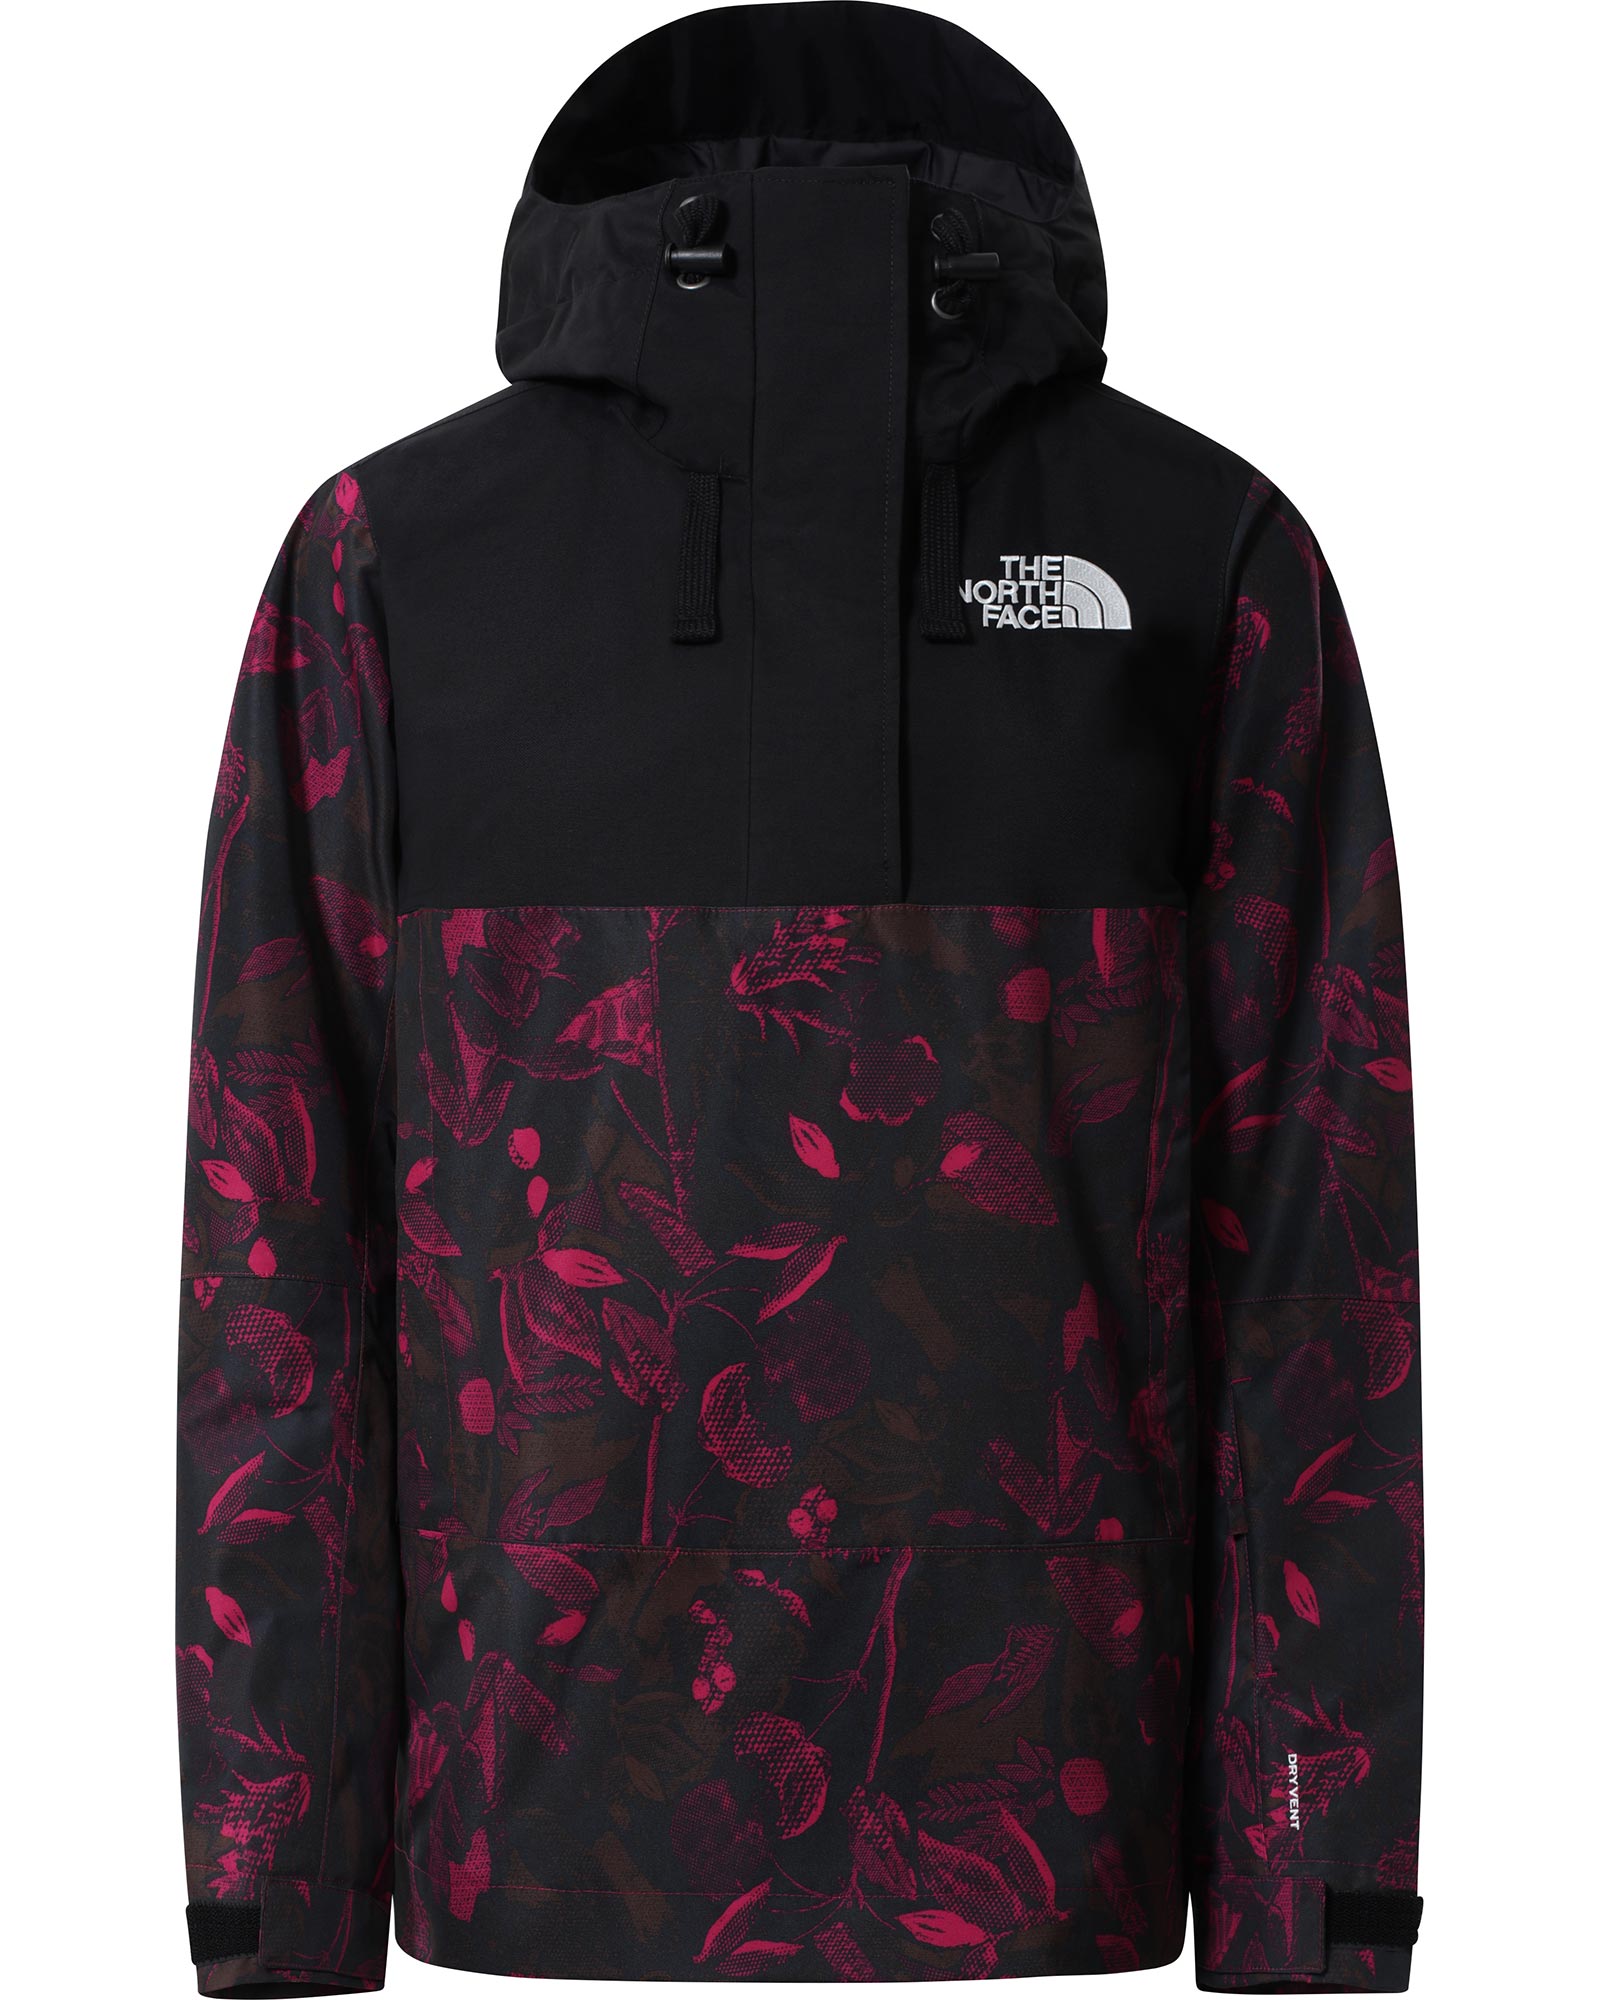 The North Face Tanager Women’s Anorak - Roxbury Pink Halftone Floral Print S